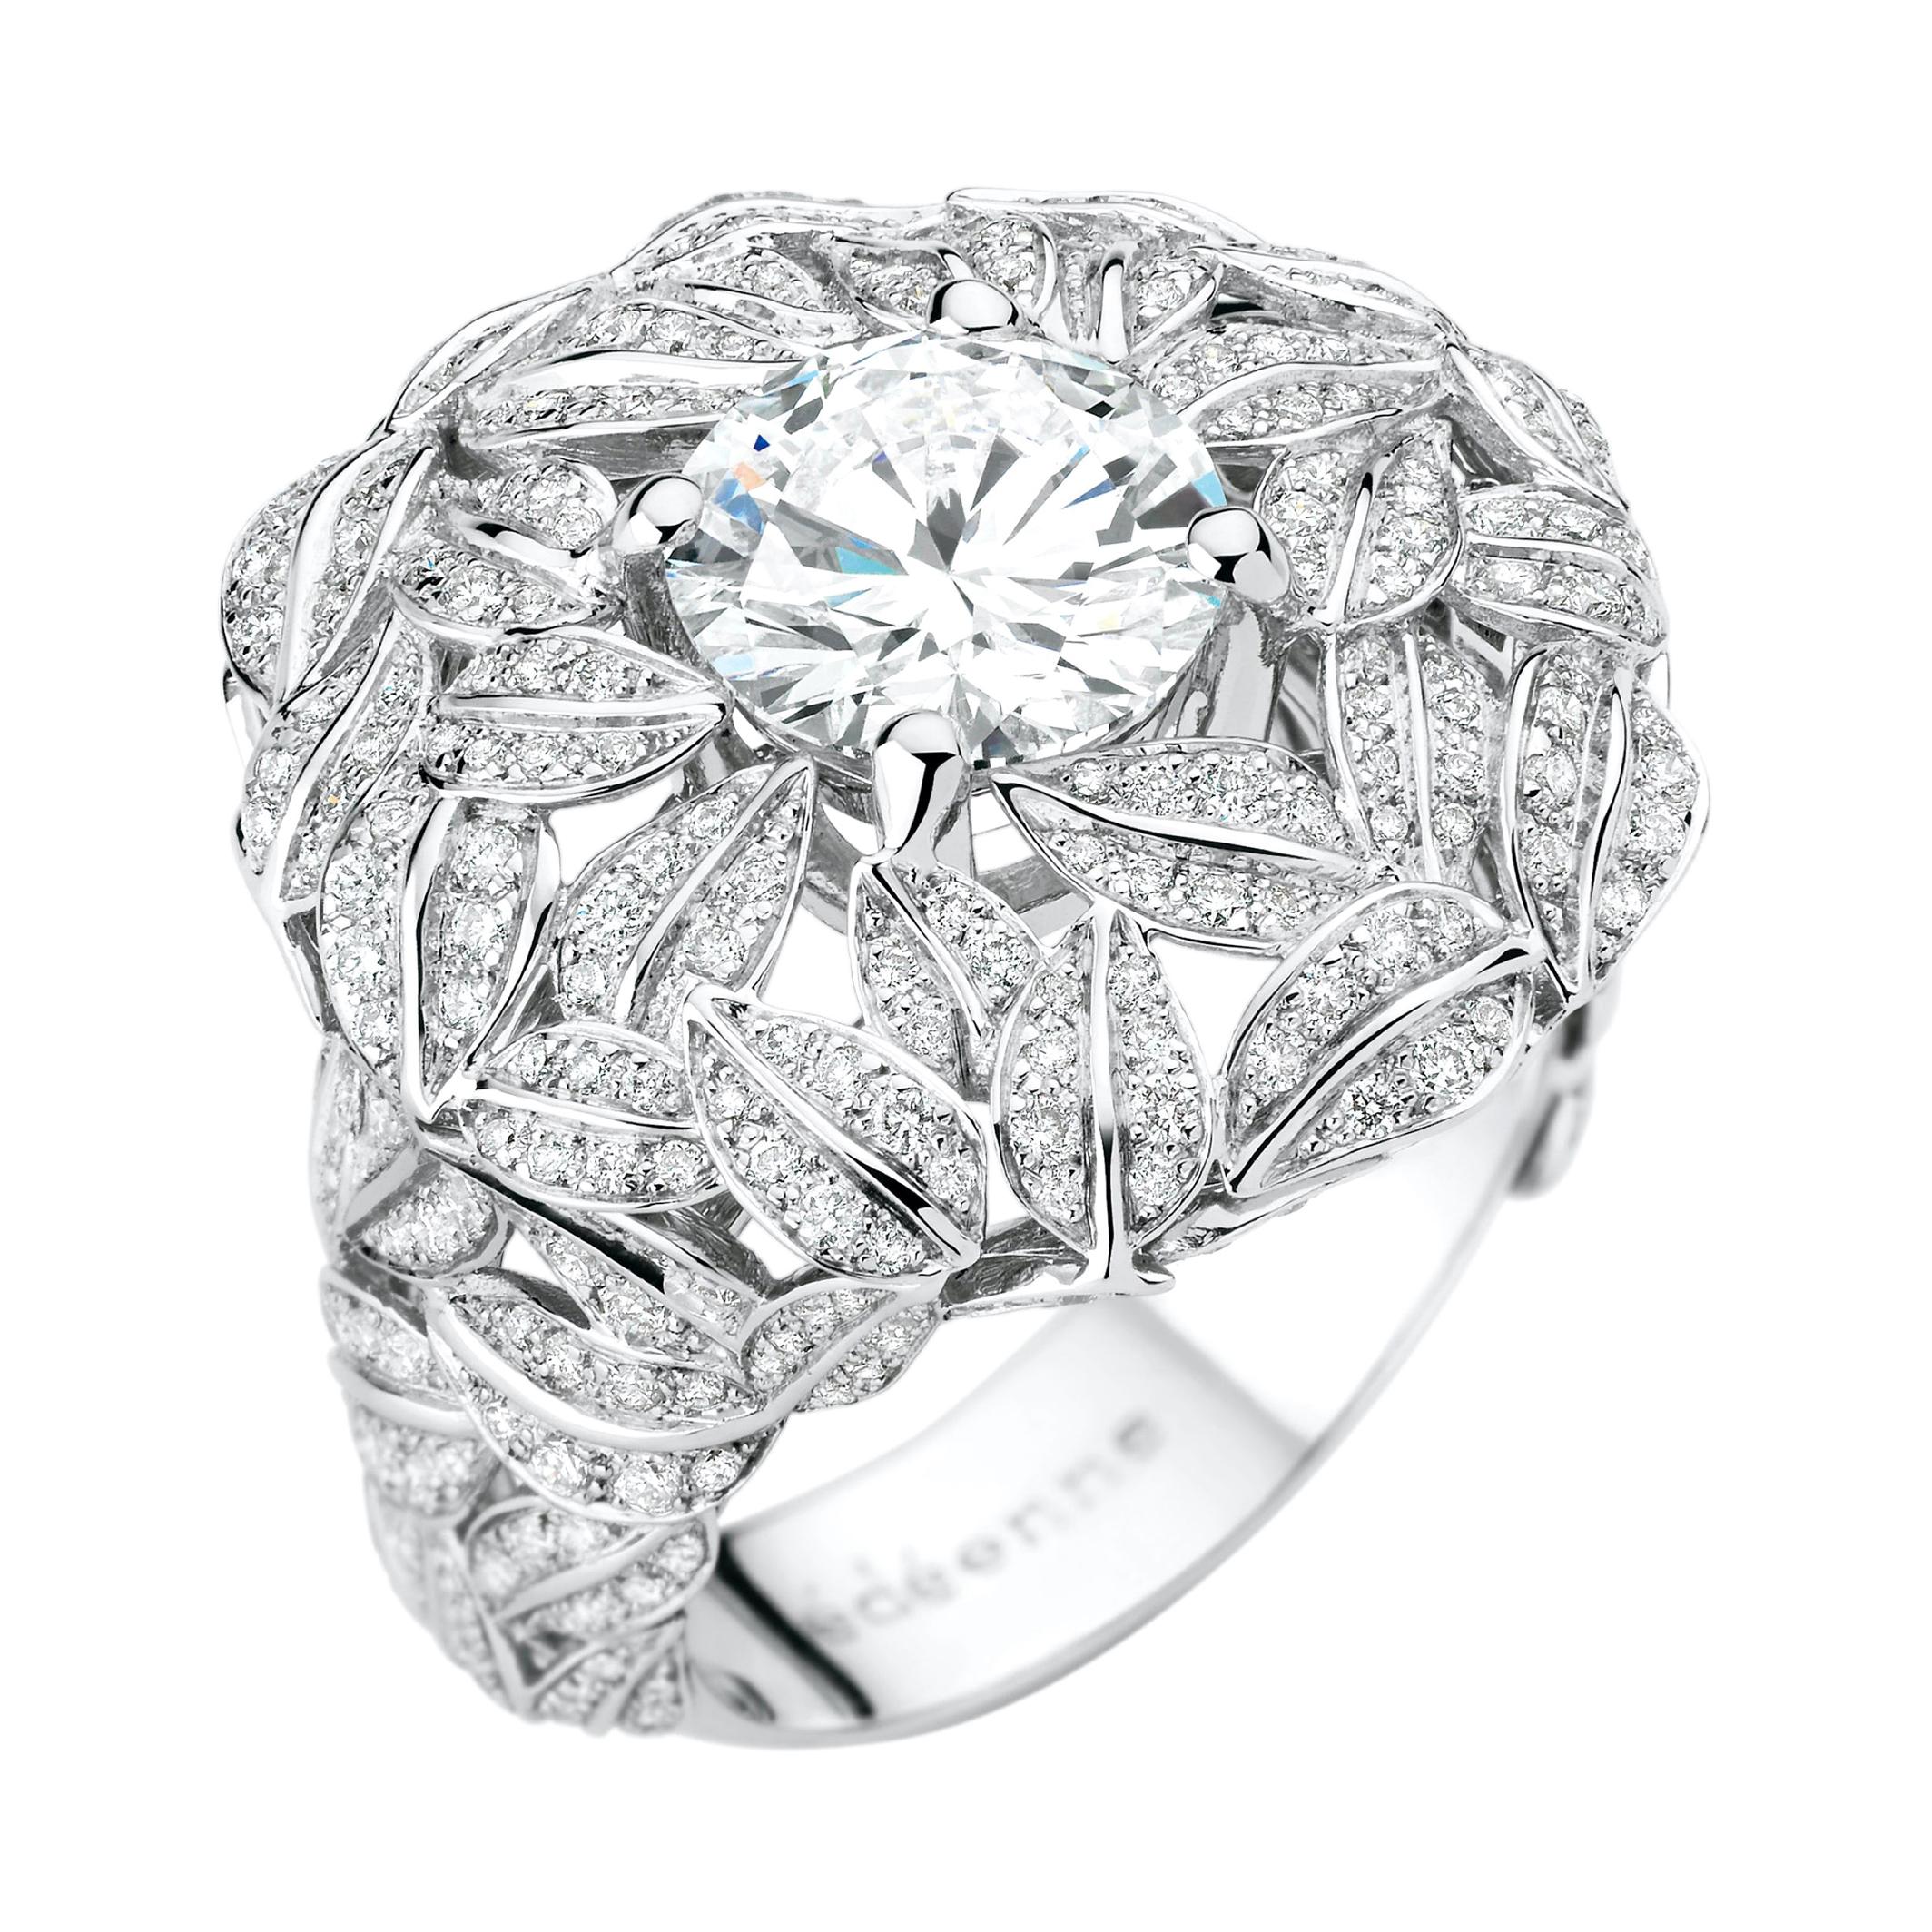 2 Carat D-Color GIA Certified Diamond 18k White Gold Ring on 400 Diamond Dome For Sale